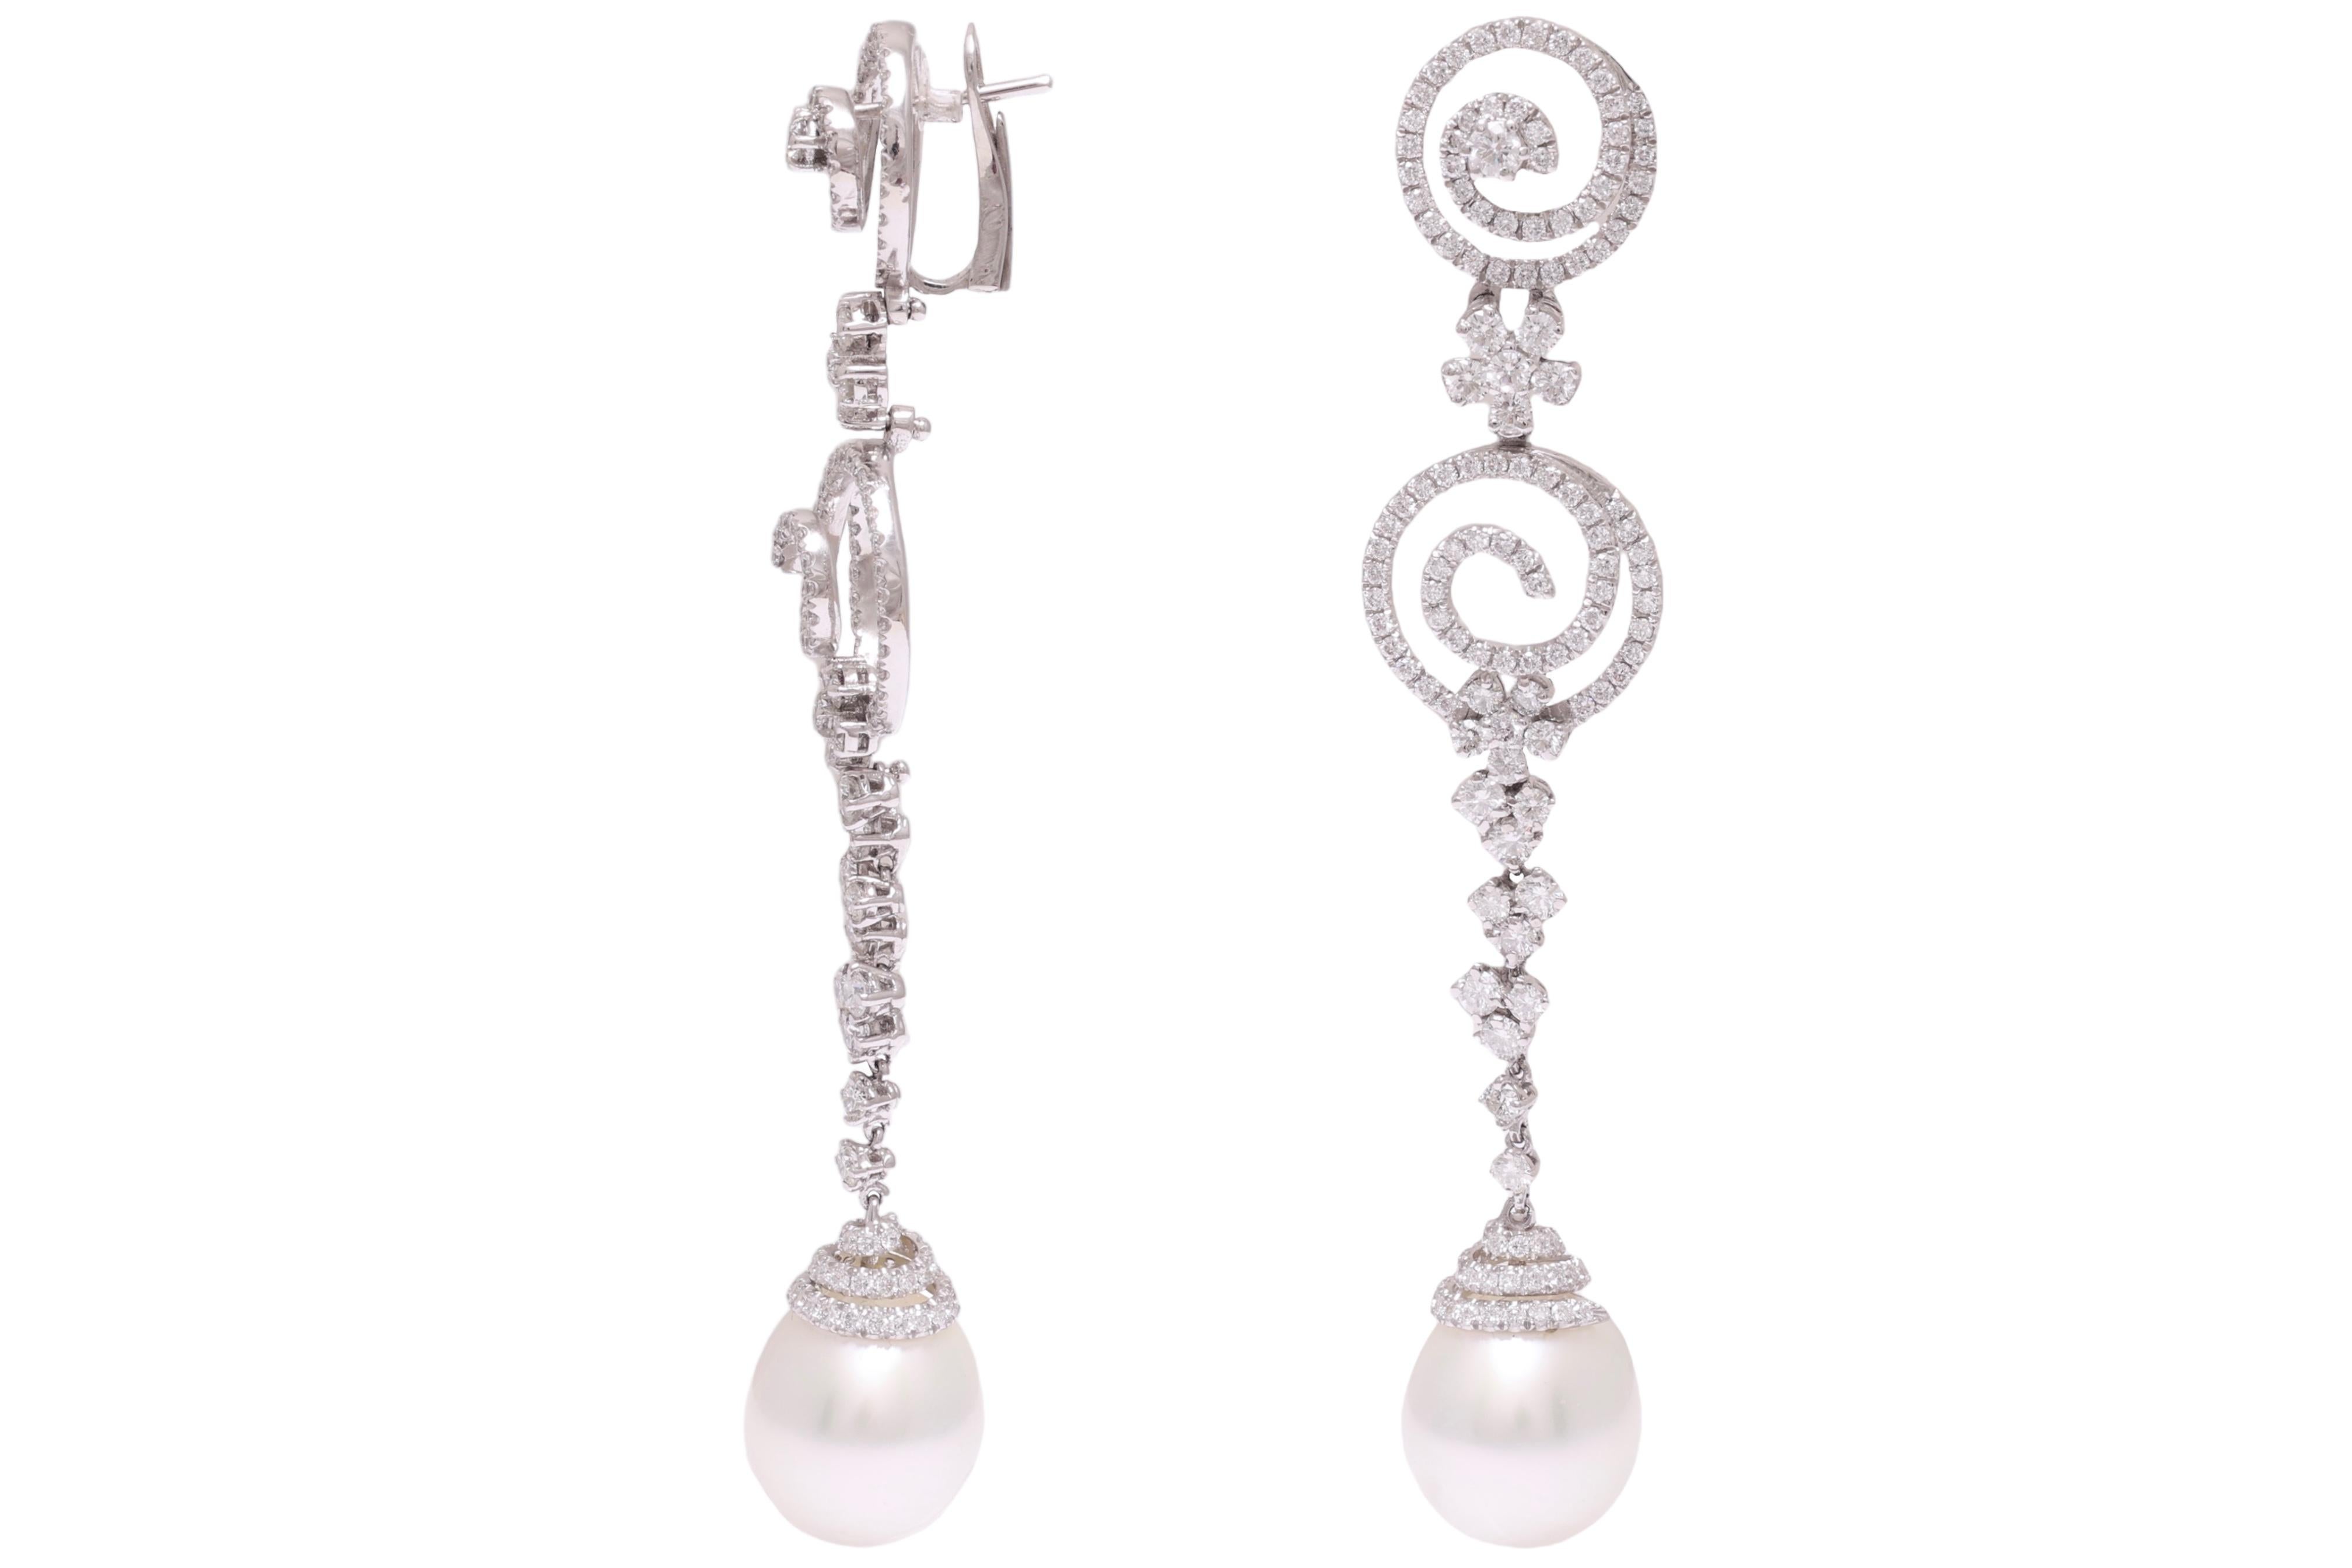 Brilliant Cut 18kt White Gold Earrings 5.10 Ct Diamonds & Pearls, Possible Matching Pendant For Sale